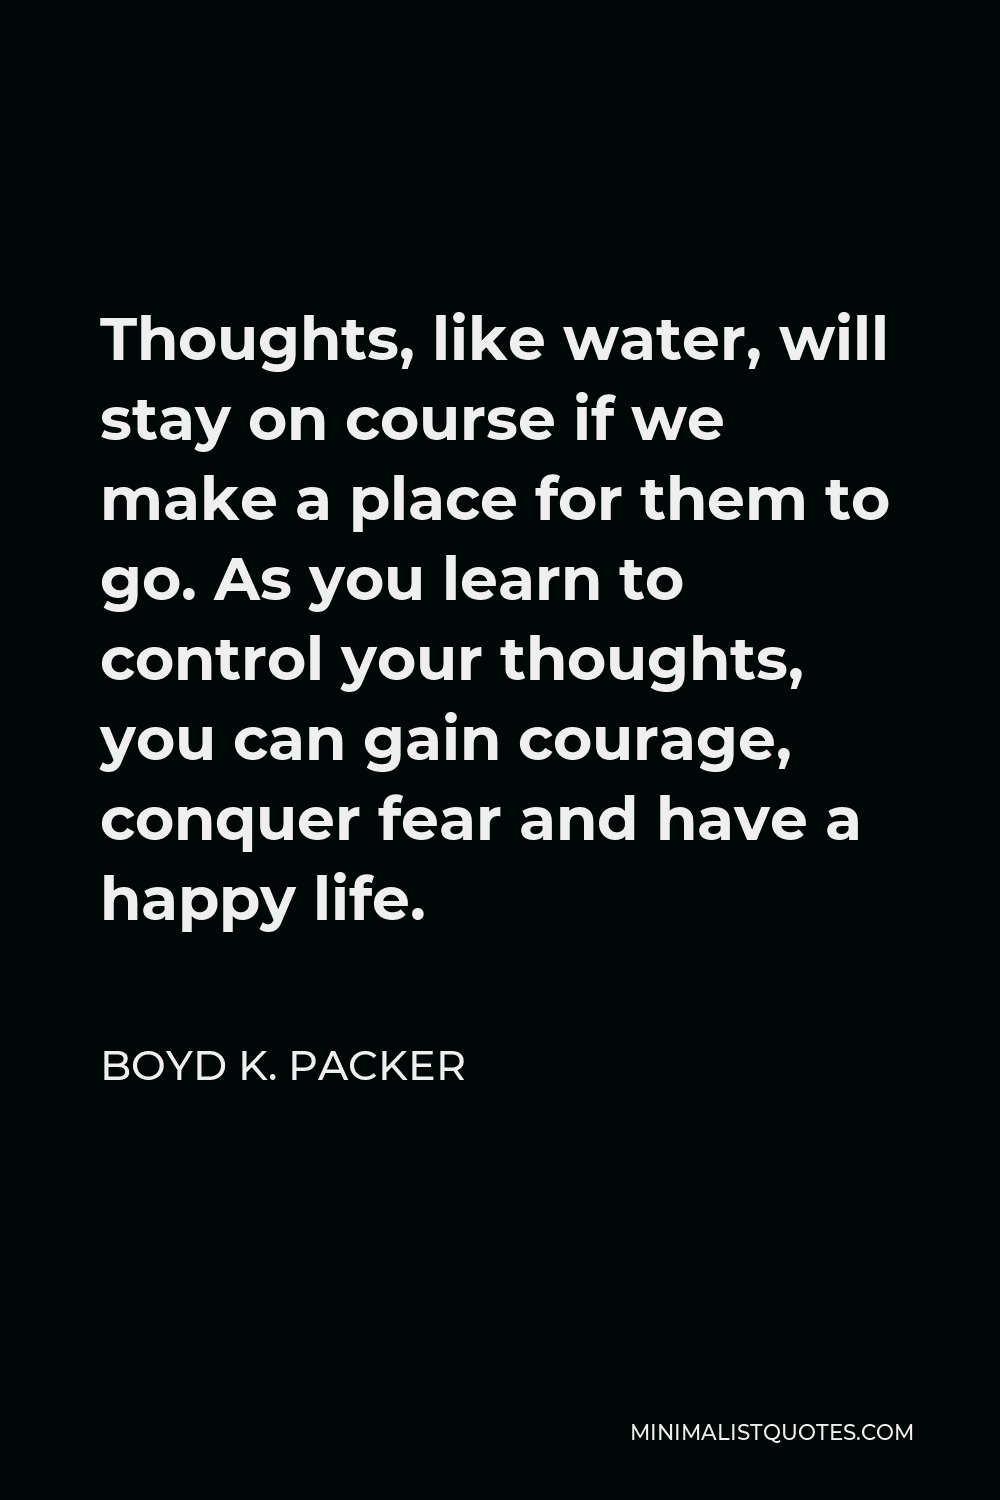 Boyd K. Packer Quote - Thoughts, like water, will stay on course if we make a place for them to go. As you learn to control your thoughts, you can gain courage, conquer fear and have a happy life.